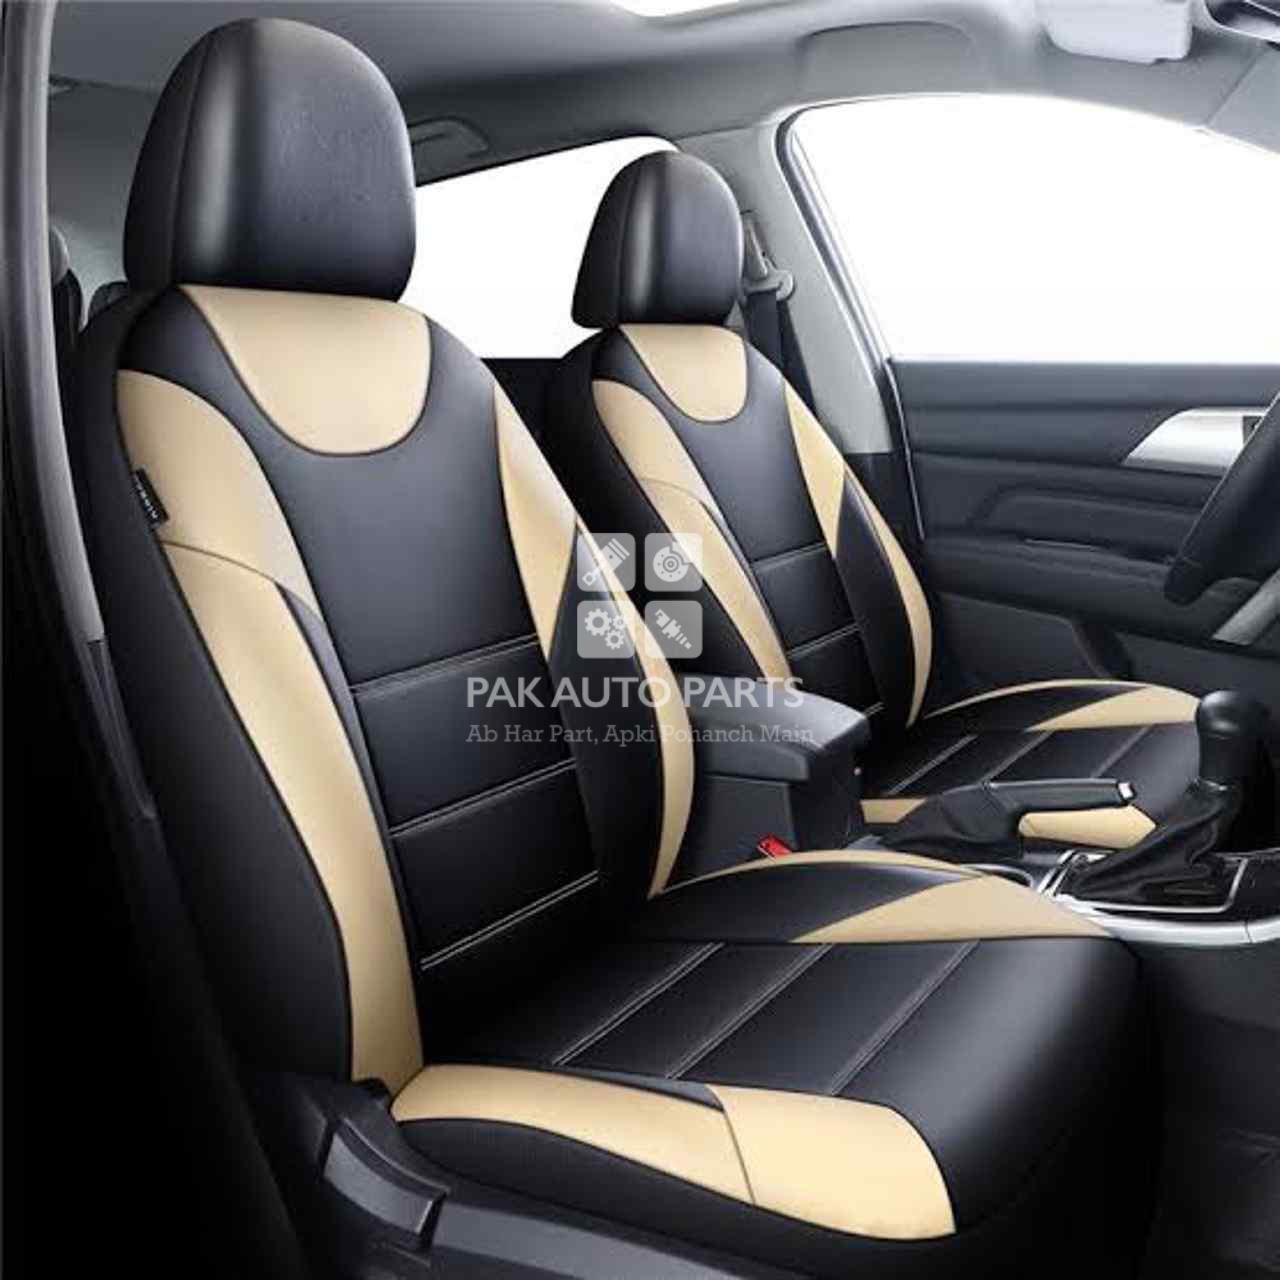 Picture of Toyota Axio Seat Covers